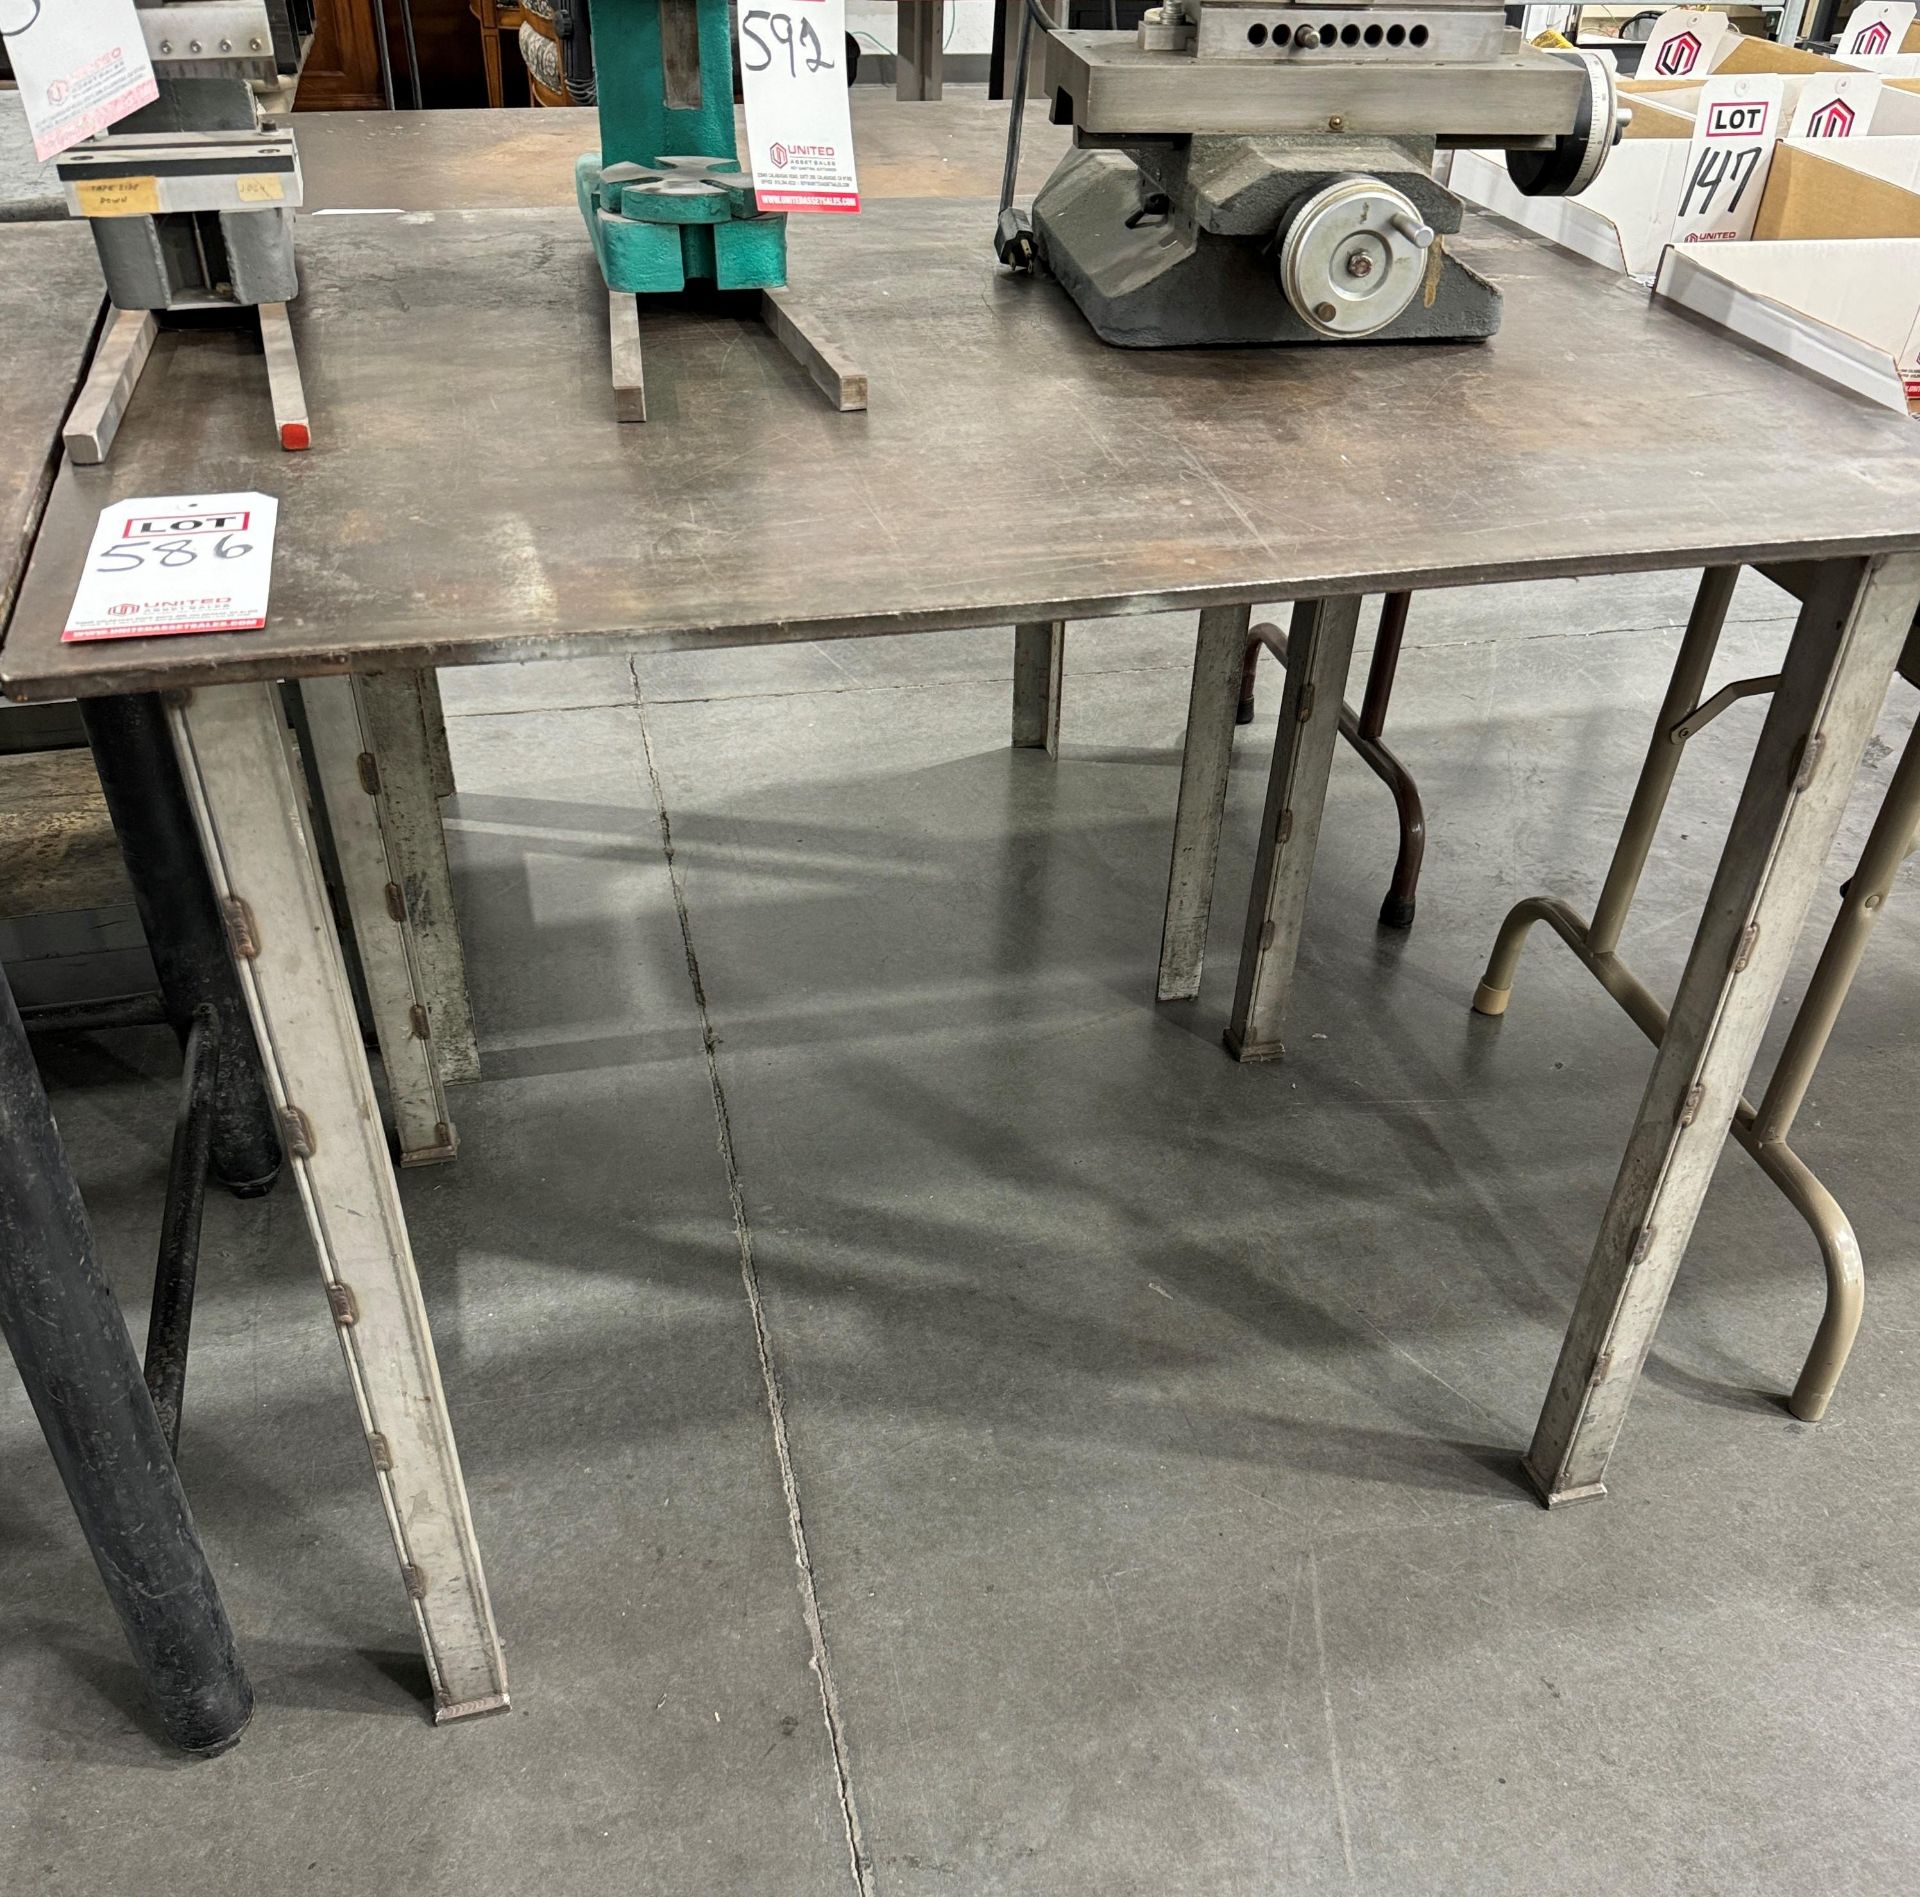 STEEL WELDING TABLE W/ 40" X 30" X 1/2" THICK TOP, 32-1/2" HT, CONTENTS NOT INCLUDED